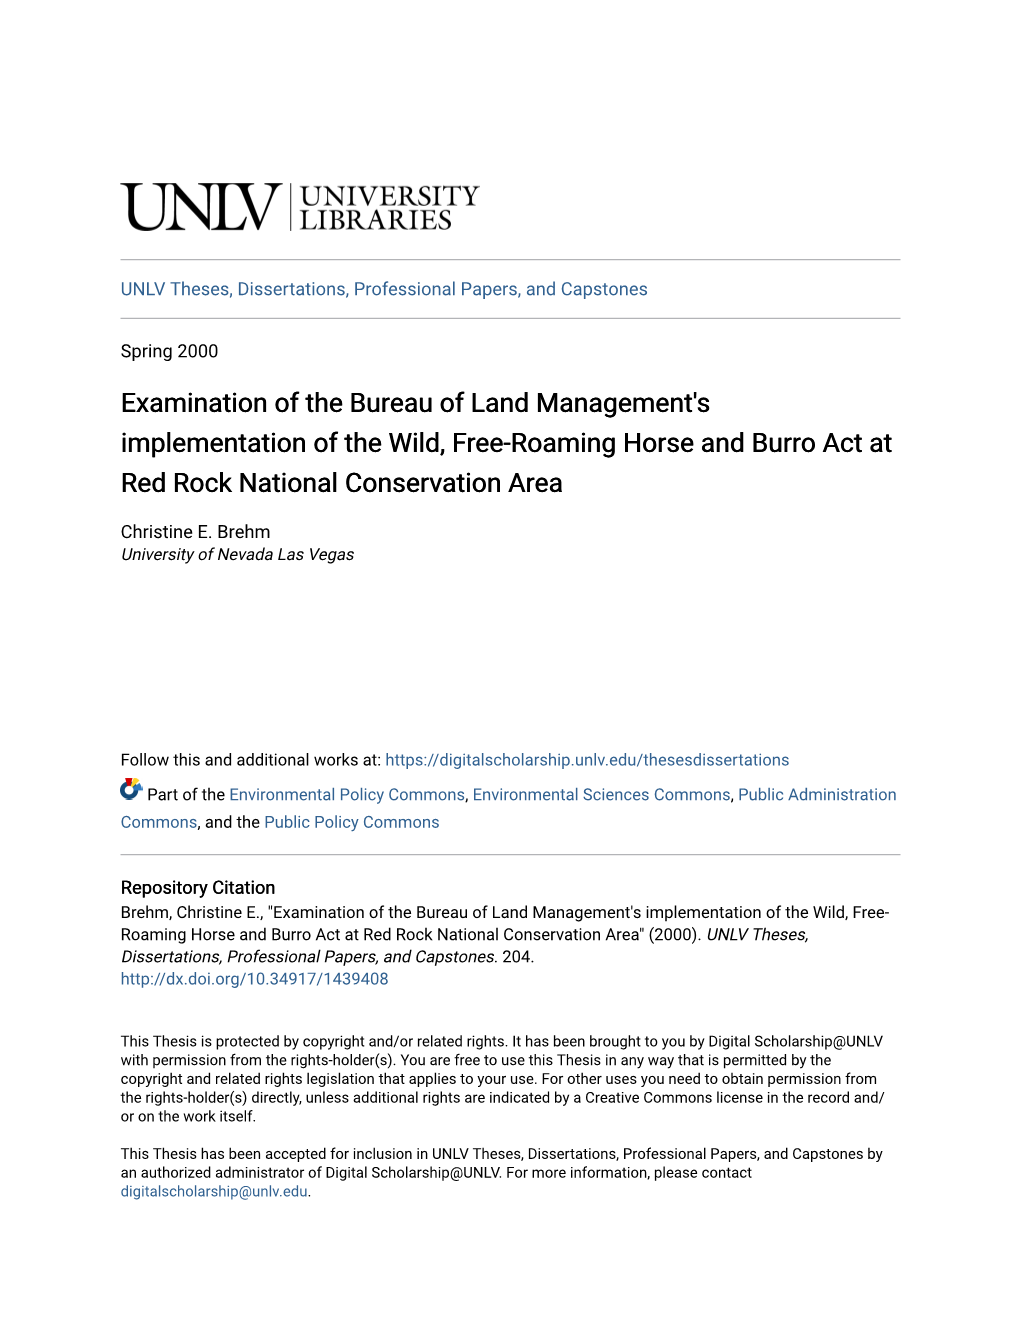 Examination of the Bureau of Land Management's Implementation of the Wild, Free-Roaming Horse and Burro Act at Red Rock National Conservation Area